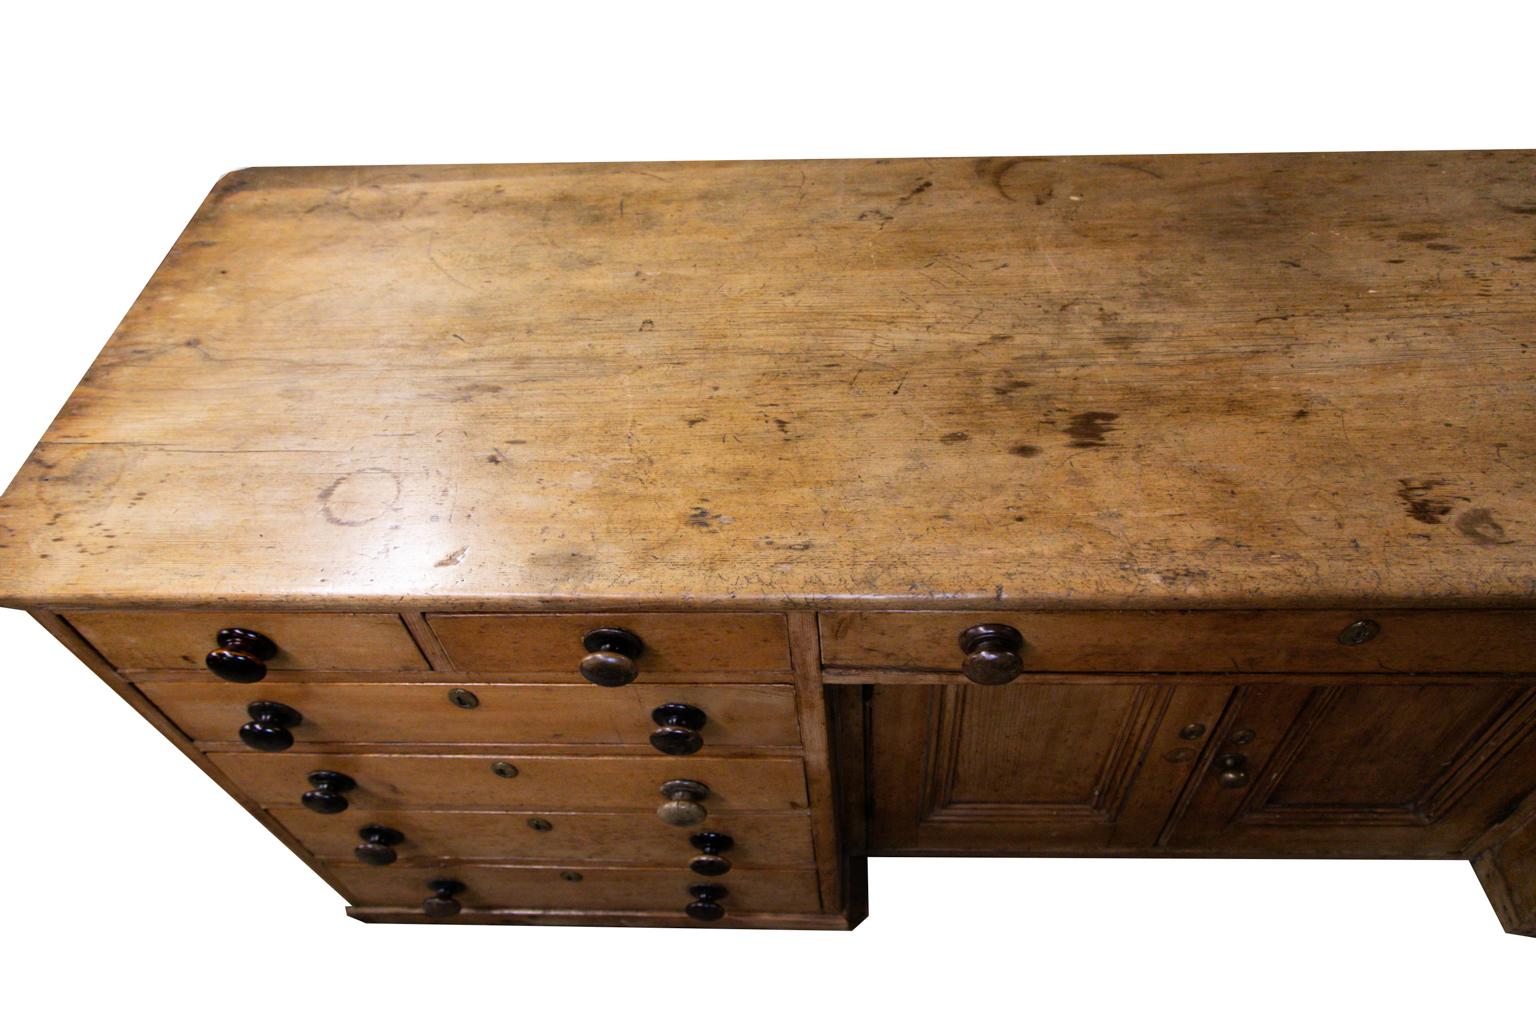 Huge English pine sideboard has three drawers and two doors. The painted knobs and turn latches are original. The top, with a bull nose edge, has a single board that is over two feet wide with a 2 1/2’ extension which is original. The sides have